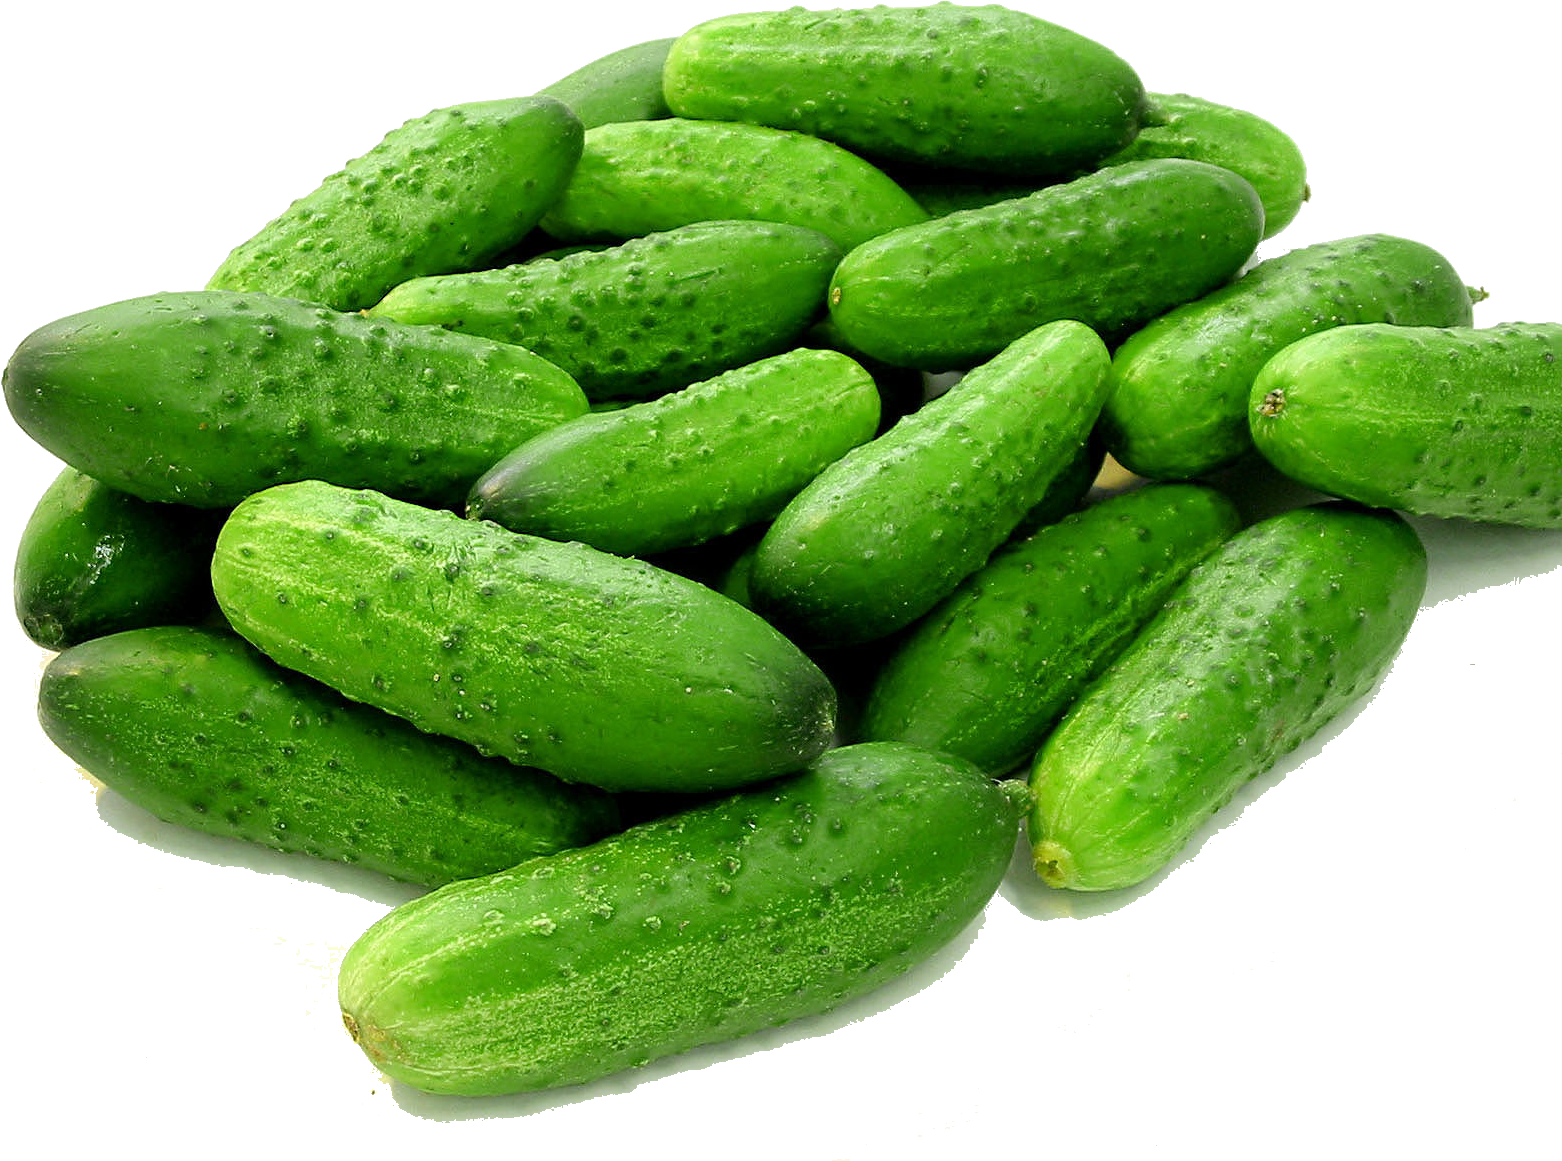 A Pile Of Green Cucumbers